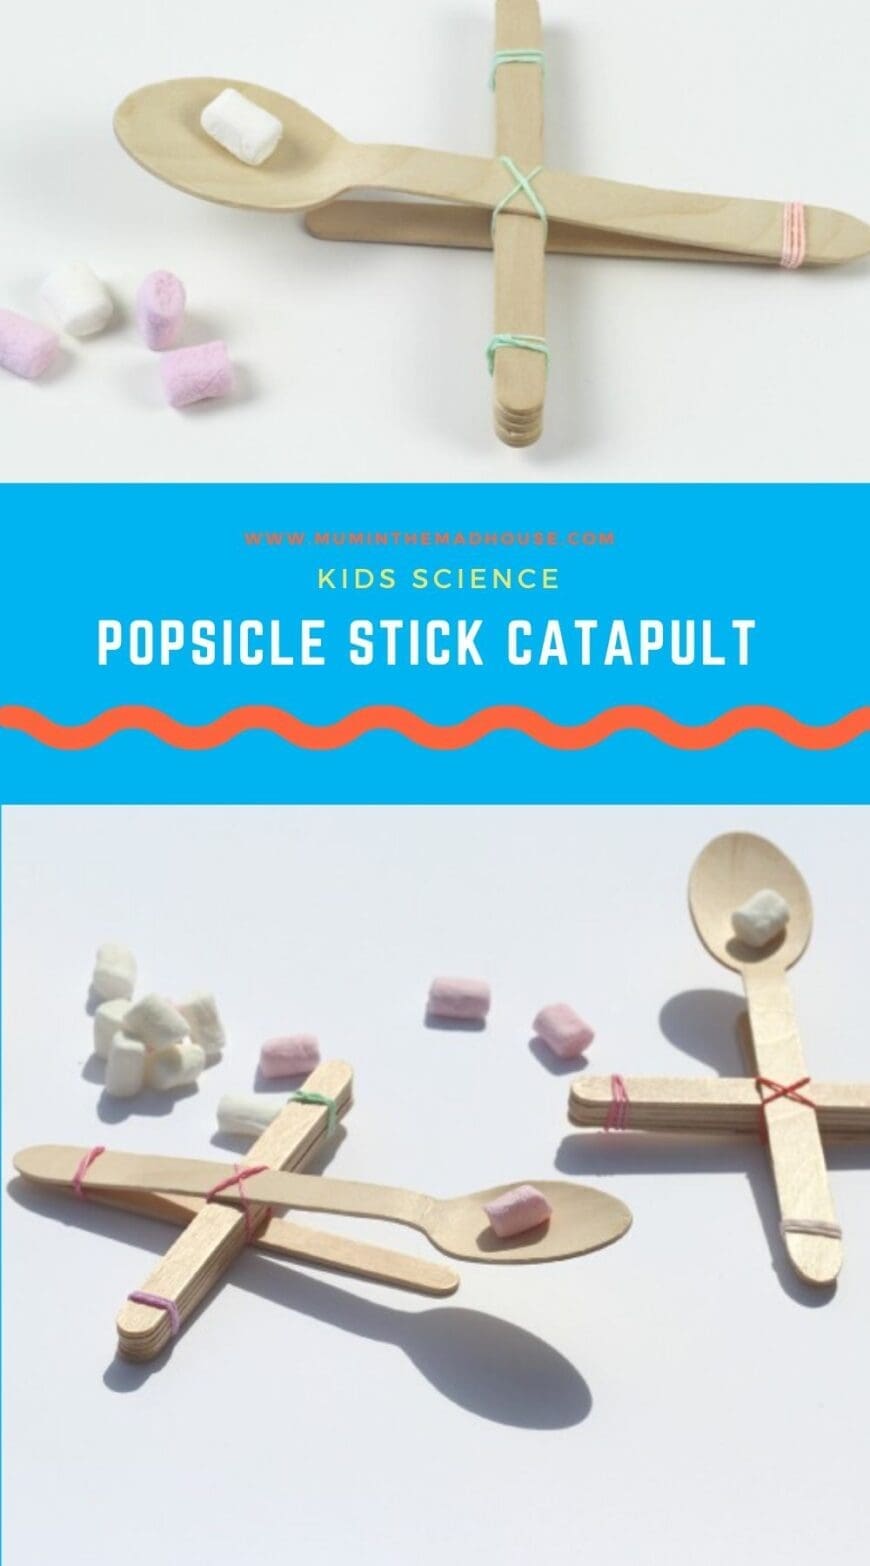 Who knew STEM and physics could be so much fun? We did! Want to learn how to make a catapult with popsicle sticks? This Popsicle stick catapult design is an AWESOME STEM activity for kids of all ages! 